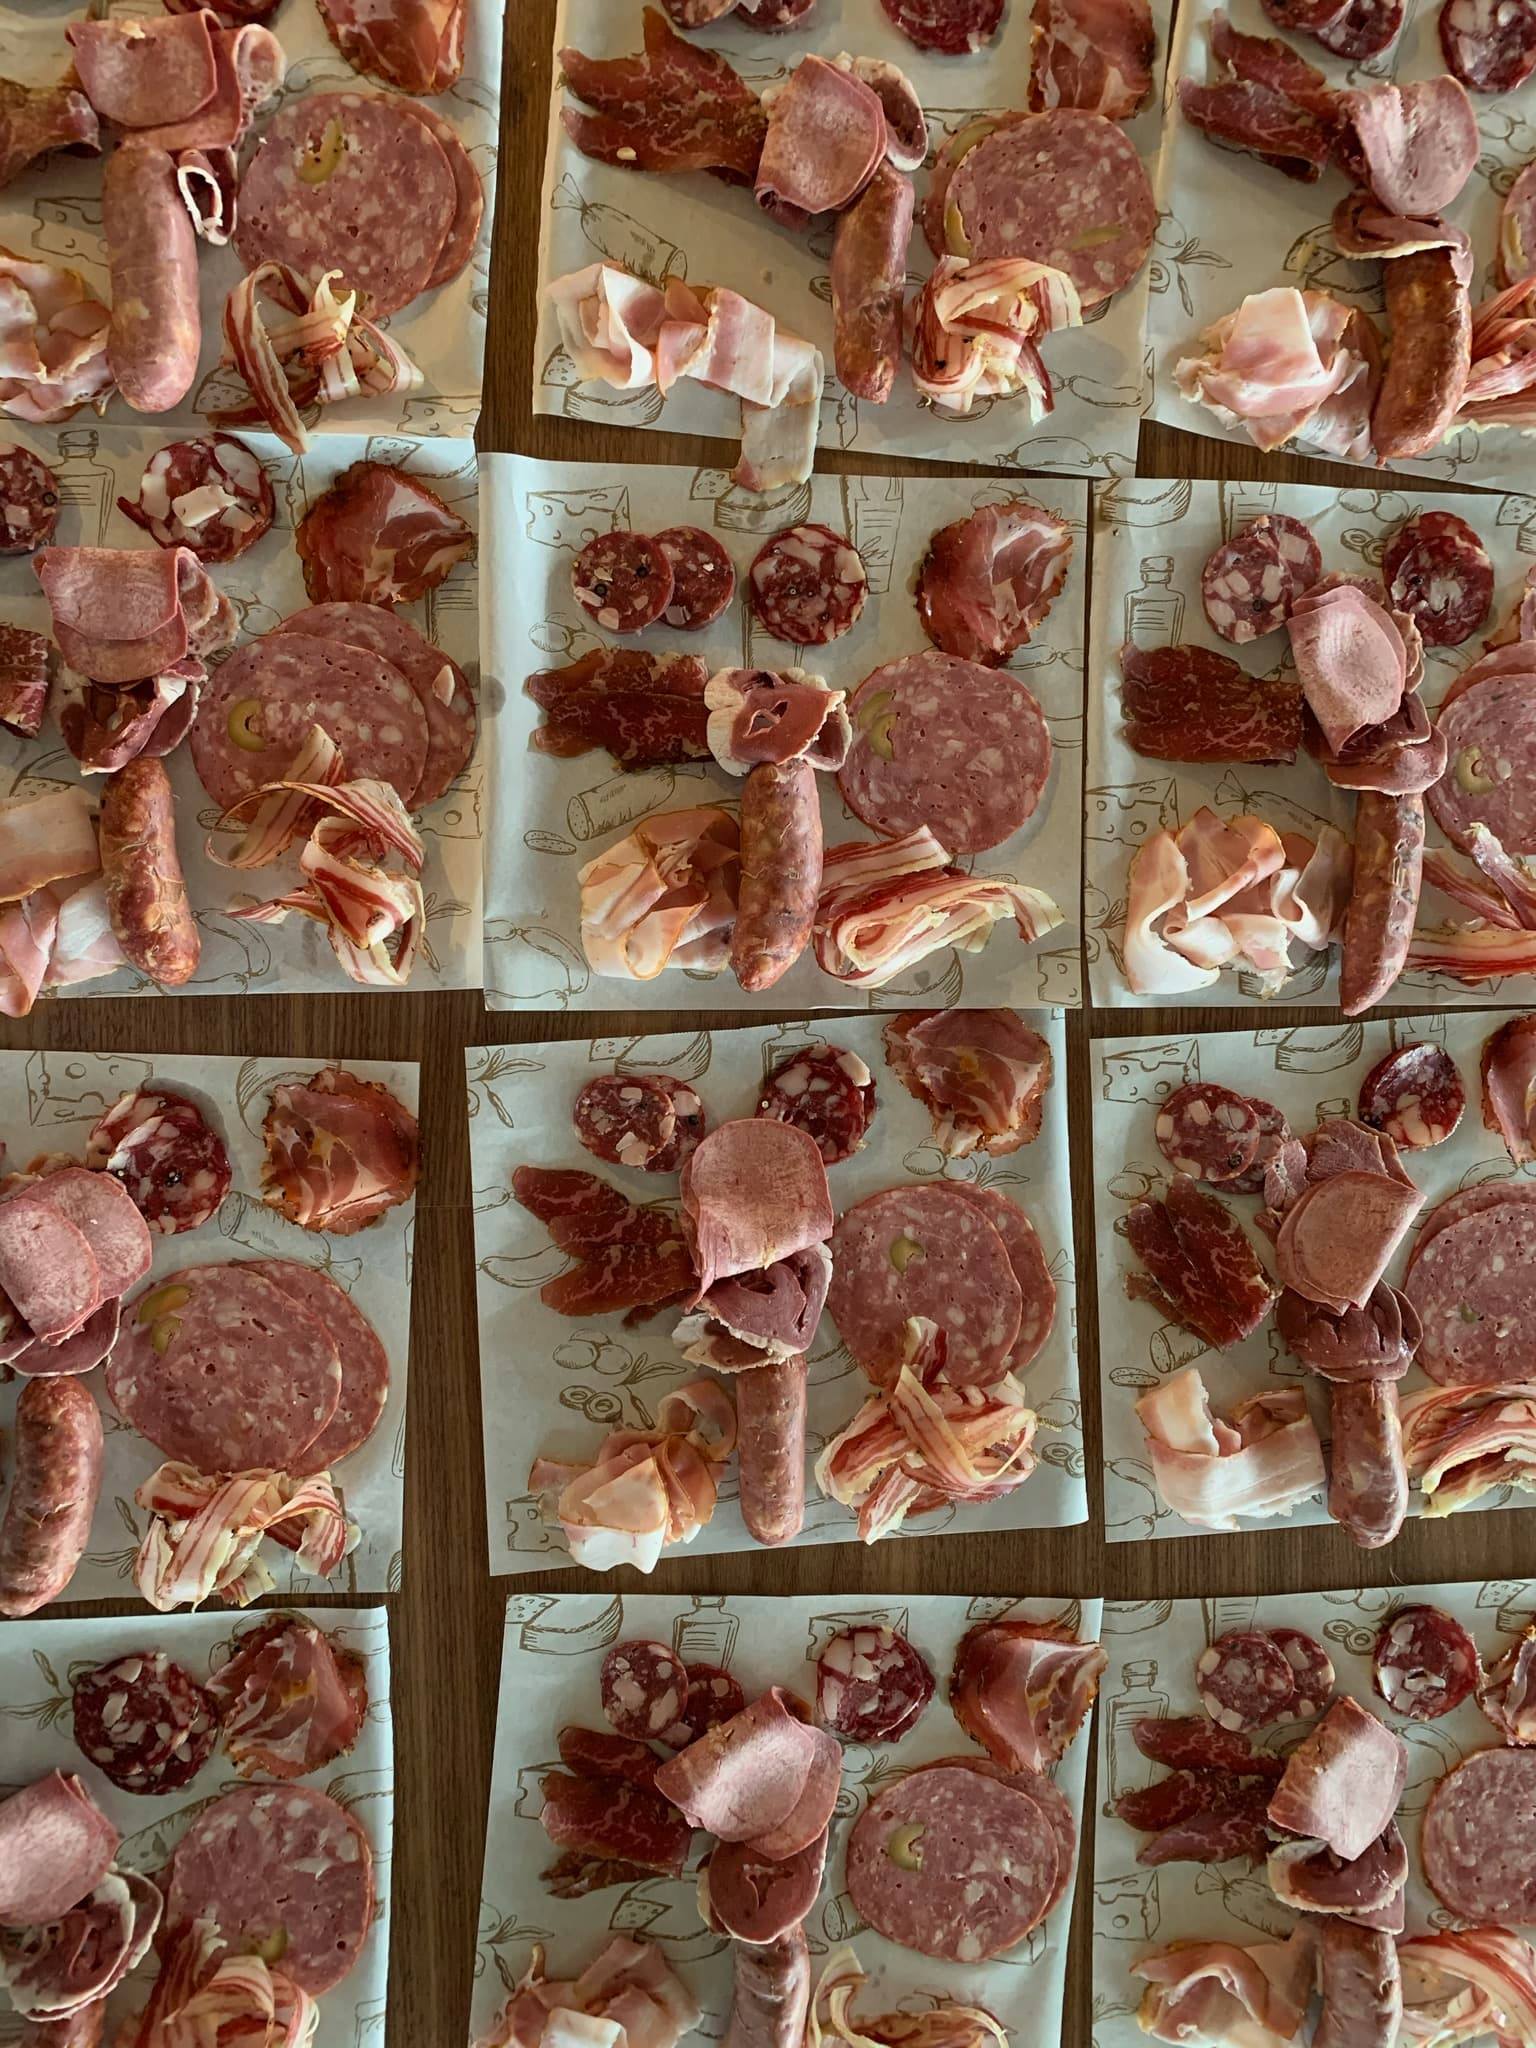 Charcuterie packs for students to taste at home, not the wurst idea